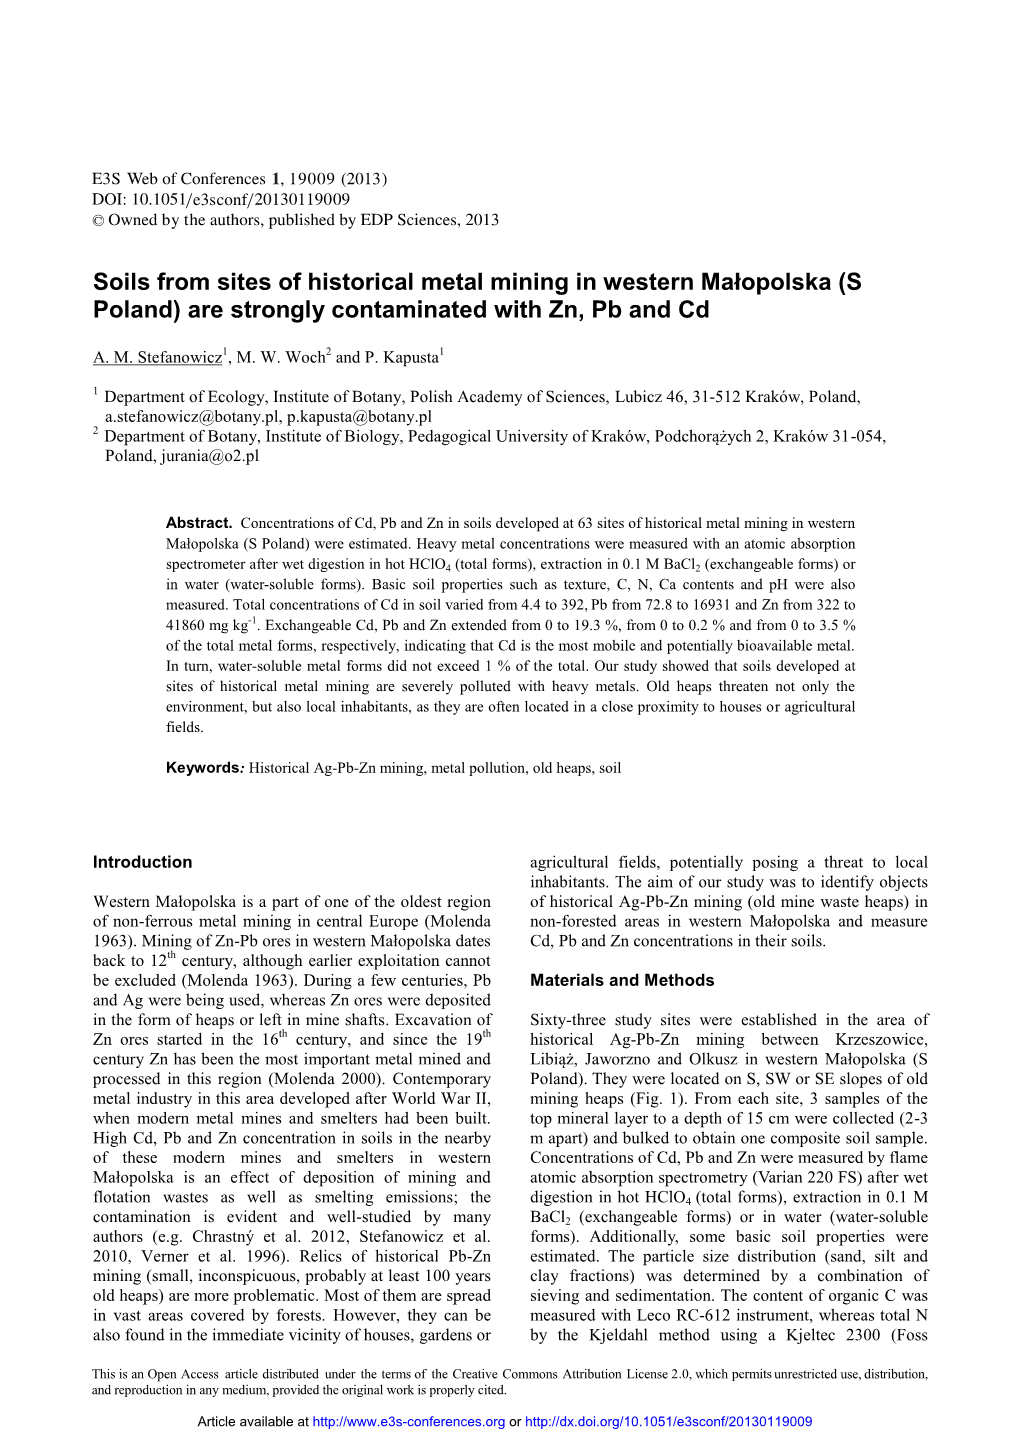 Soils from Sites of Historical Metal Mining in Western Małopolska \(S Poland\) Are Strongly Contaminated with Zn, Pb and Cd